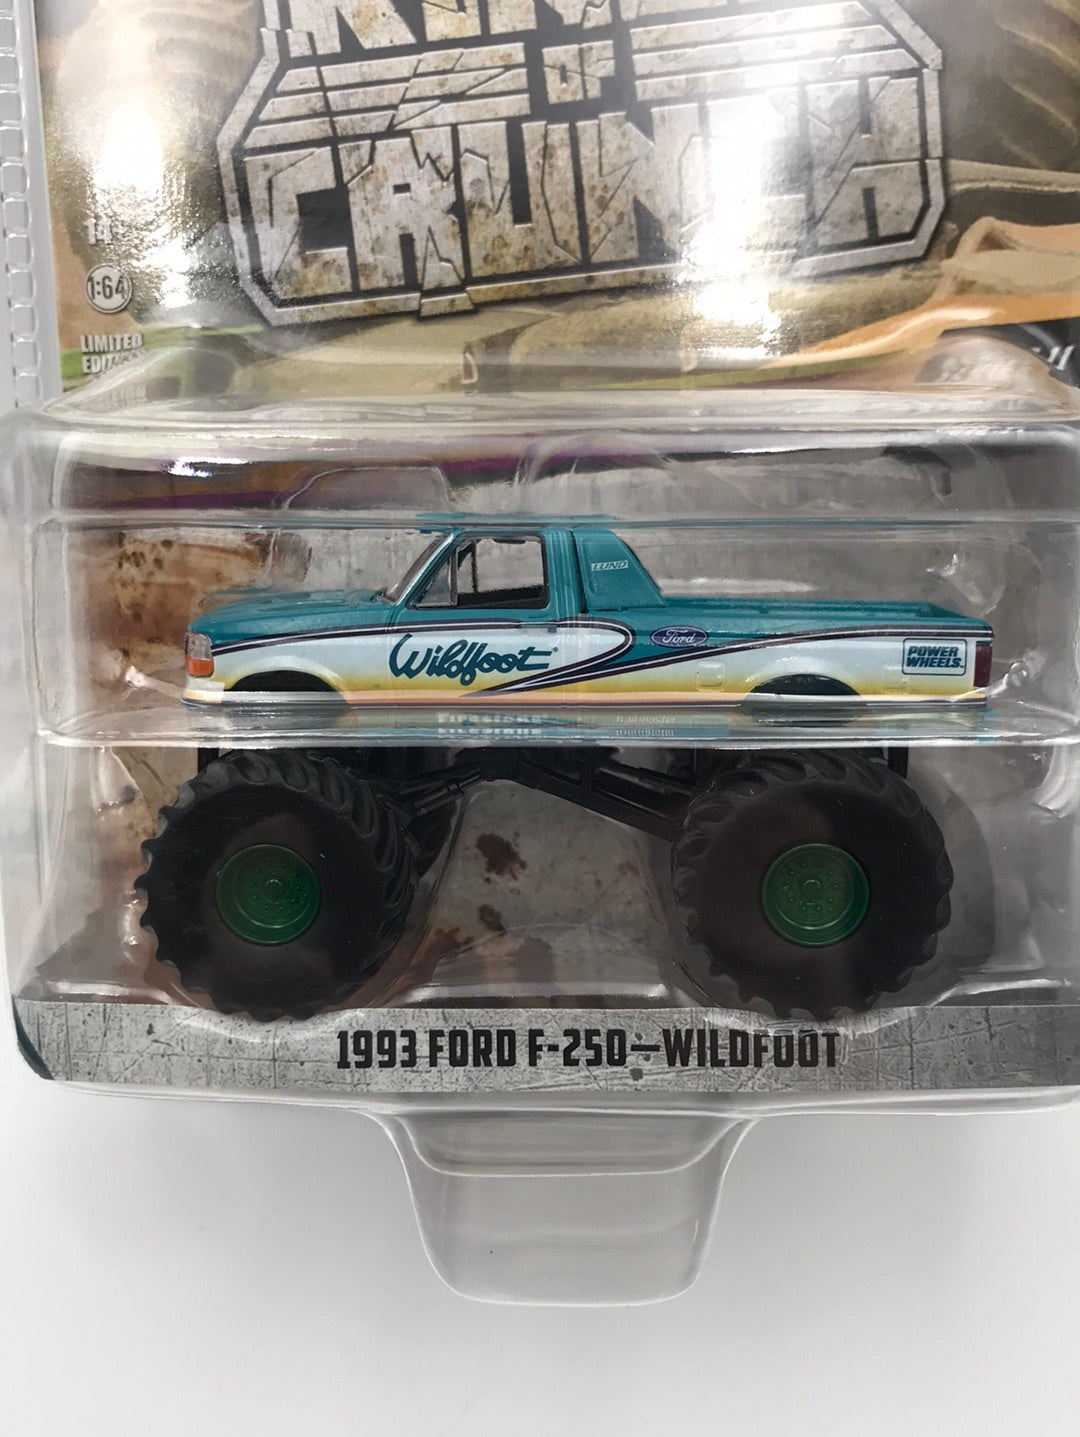 Greenlight Kings of crunch series 11 1993 Ford F-250 Wildfoot greenie chase green machine VHTF